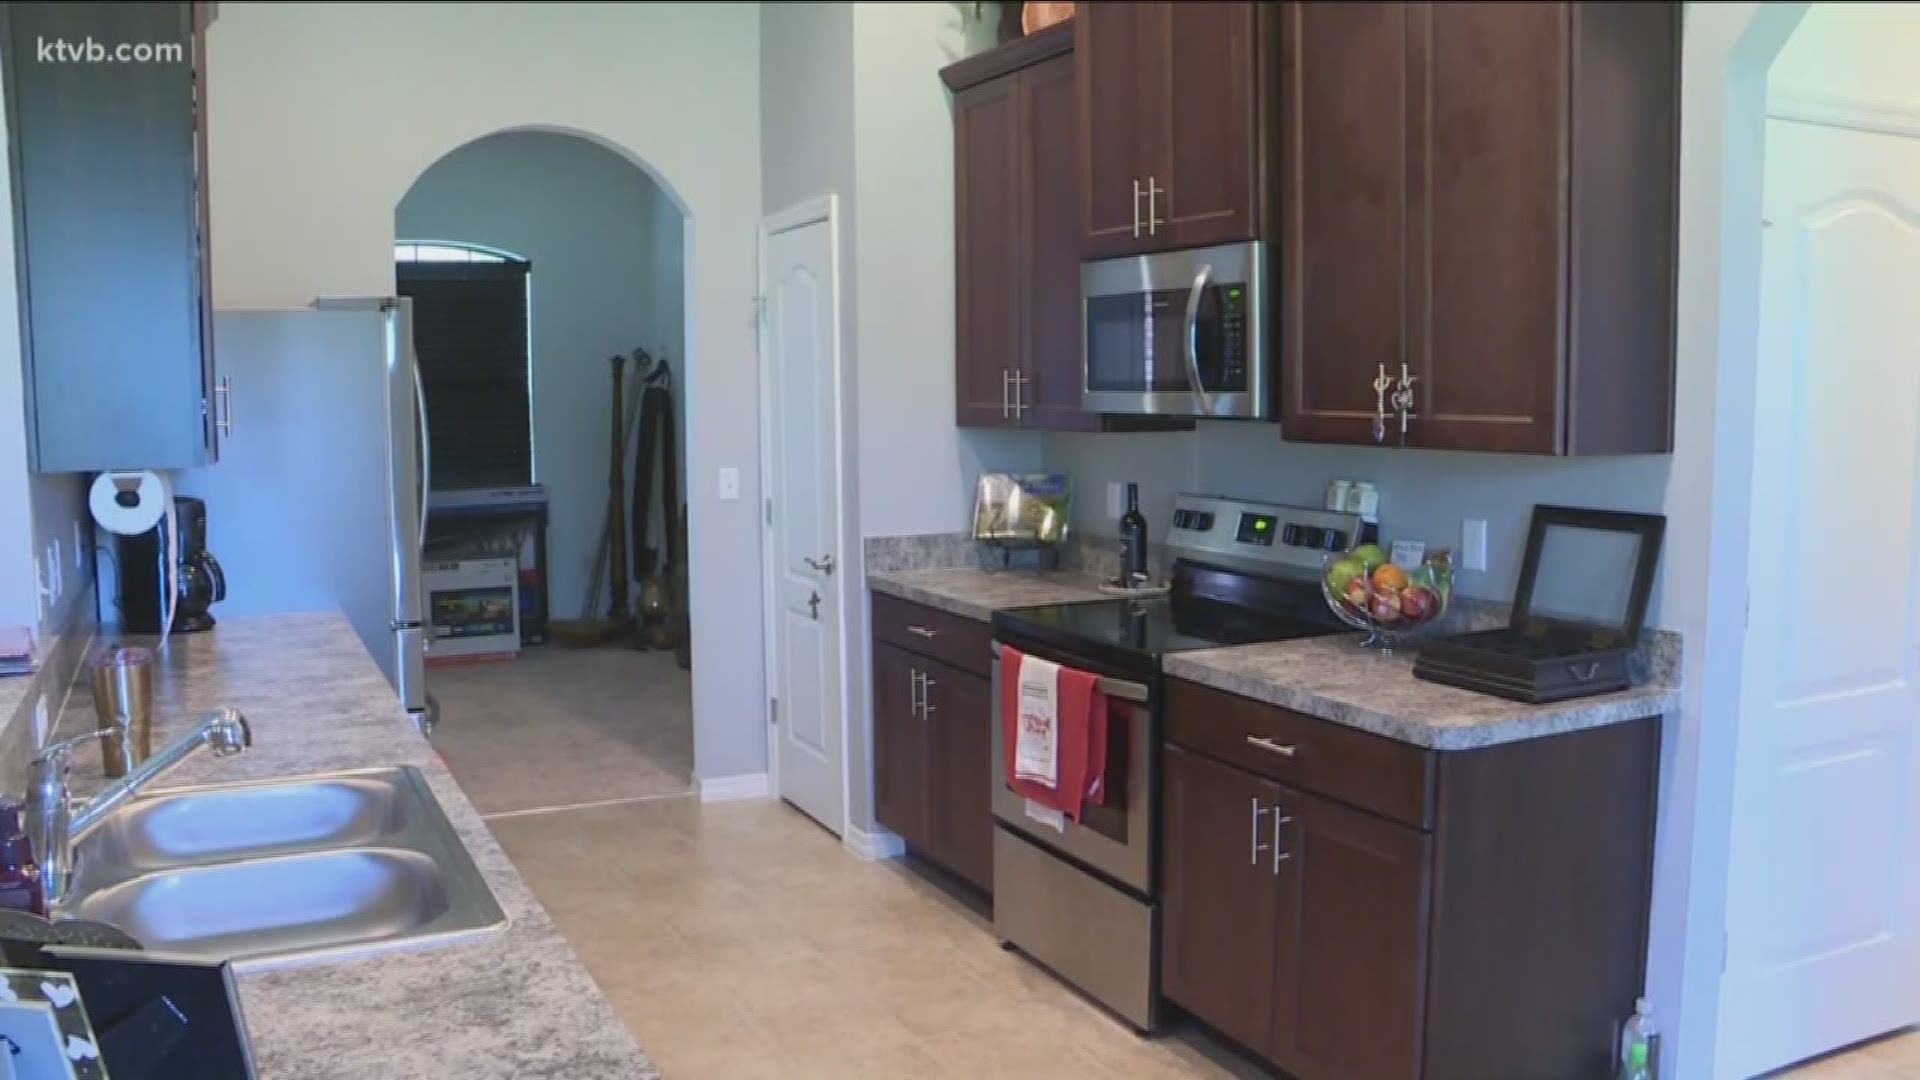 The City of Boise is now aiming to regulate Airbnb's.